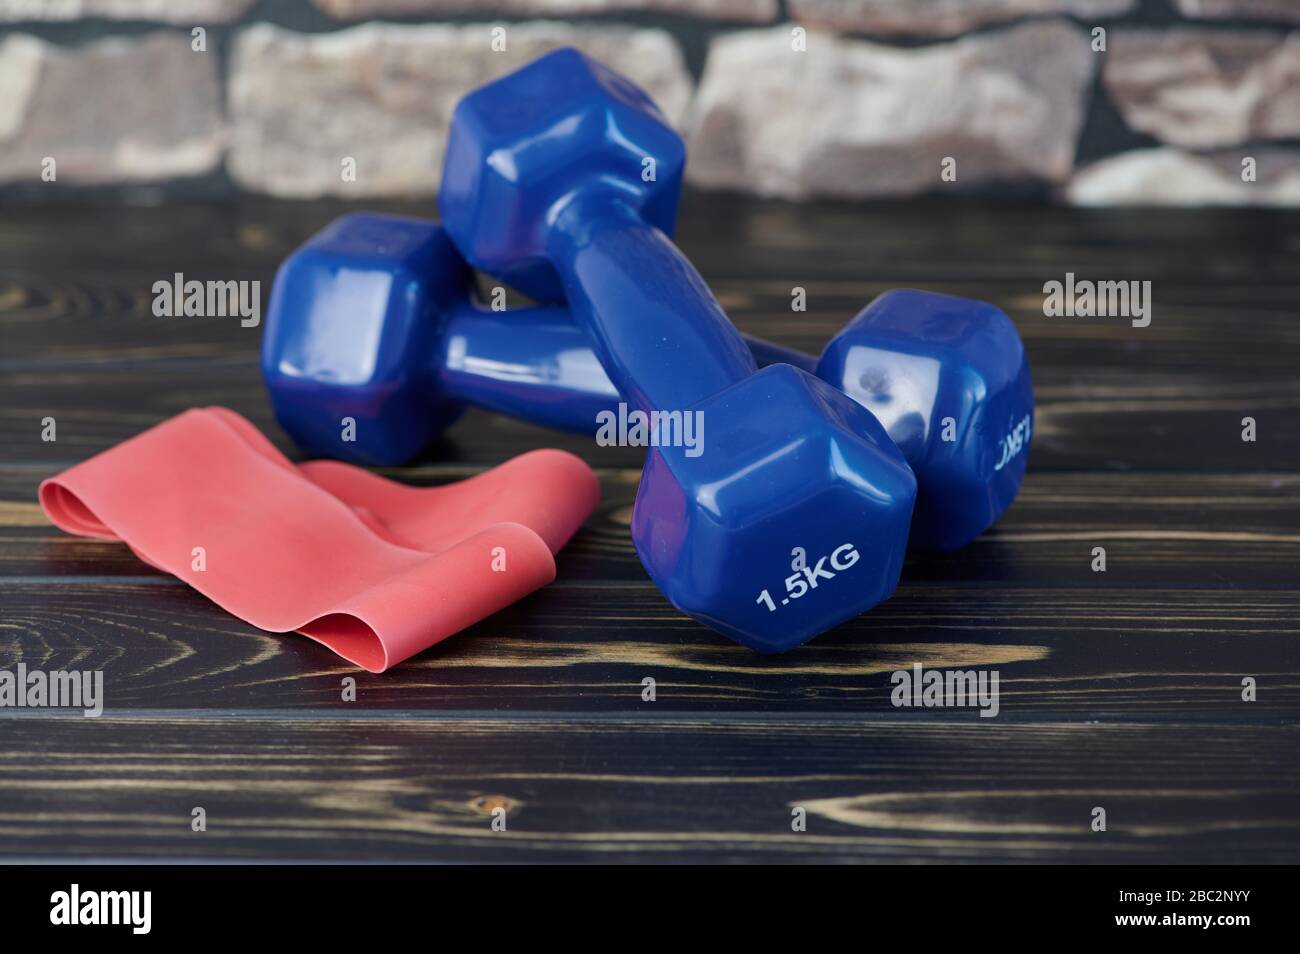 red elastic exercise band beside blue dumbbells on wooden surface Stock Photo